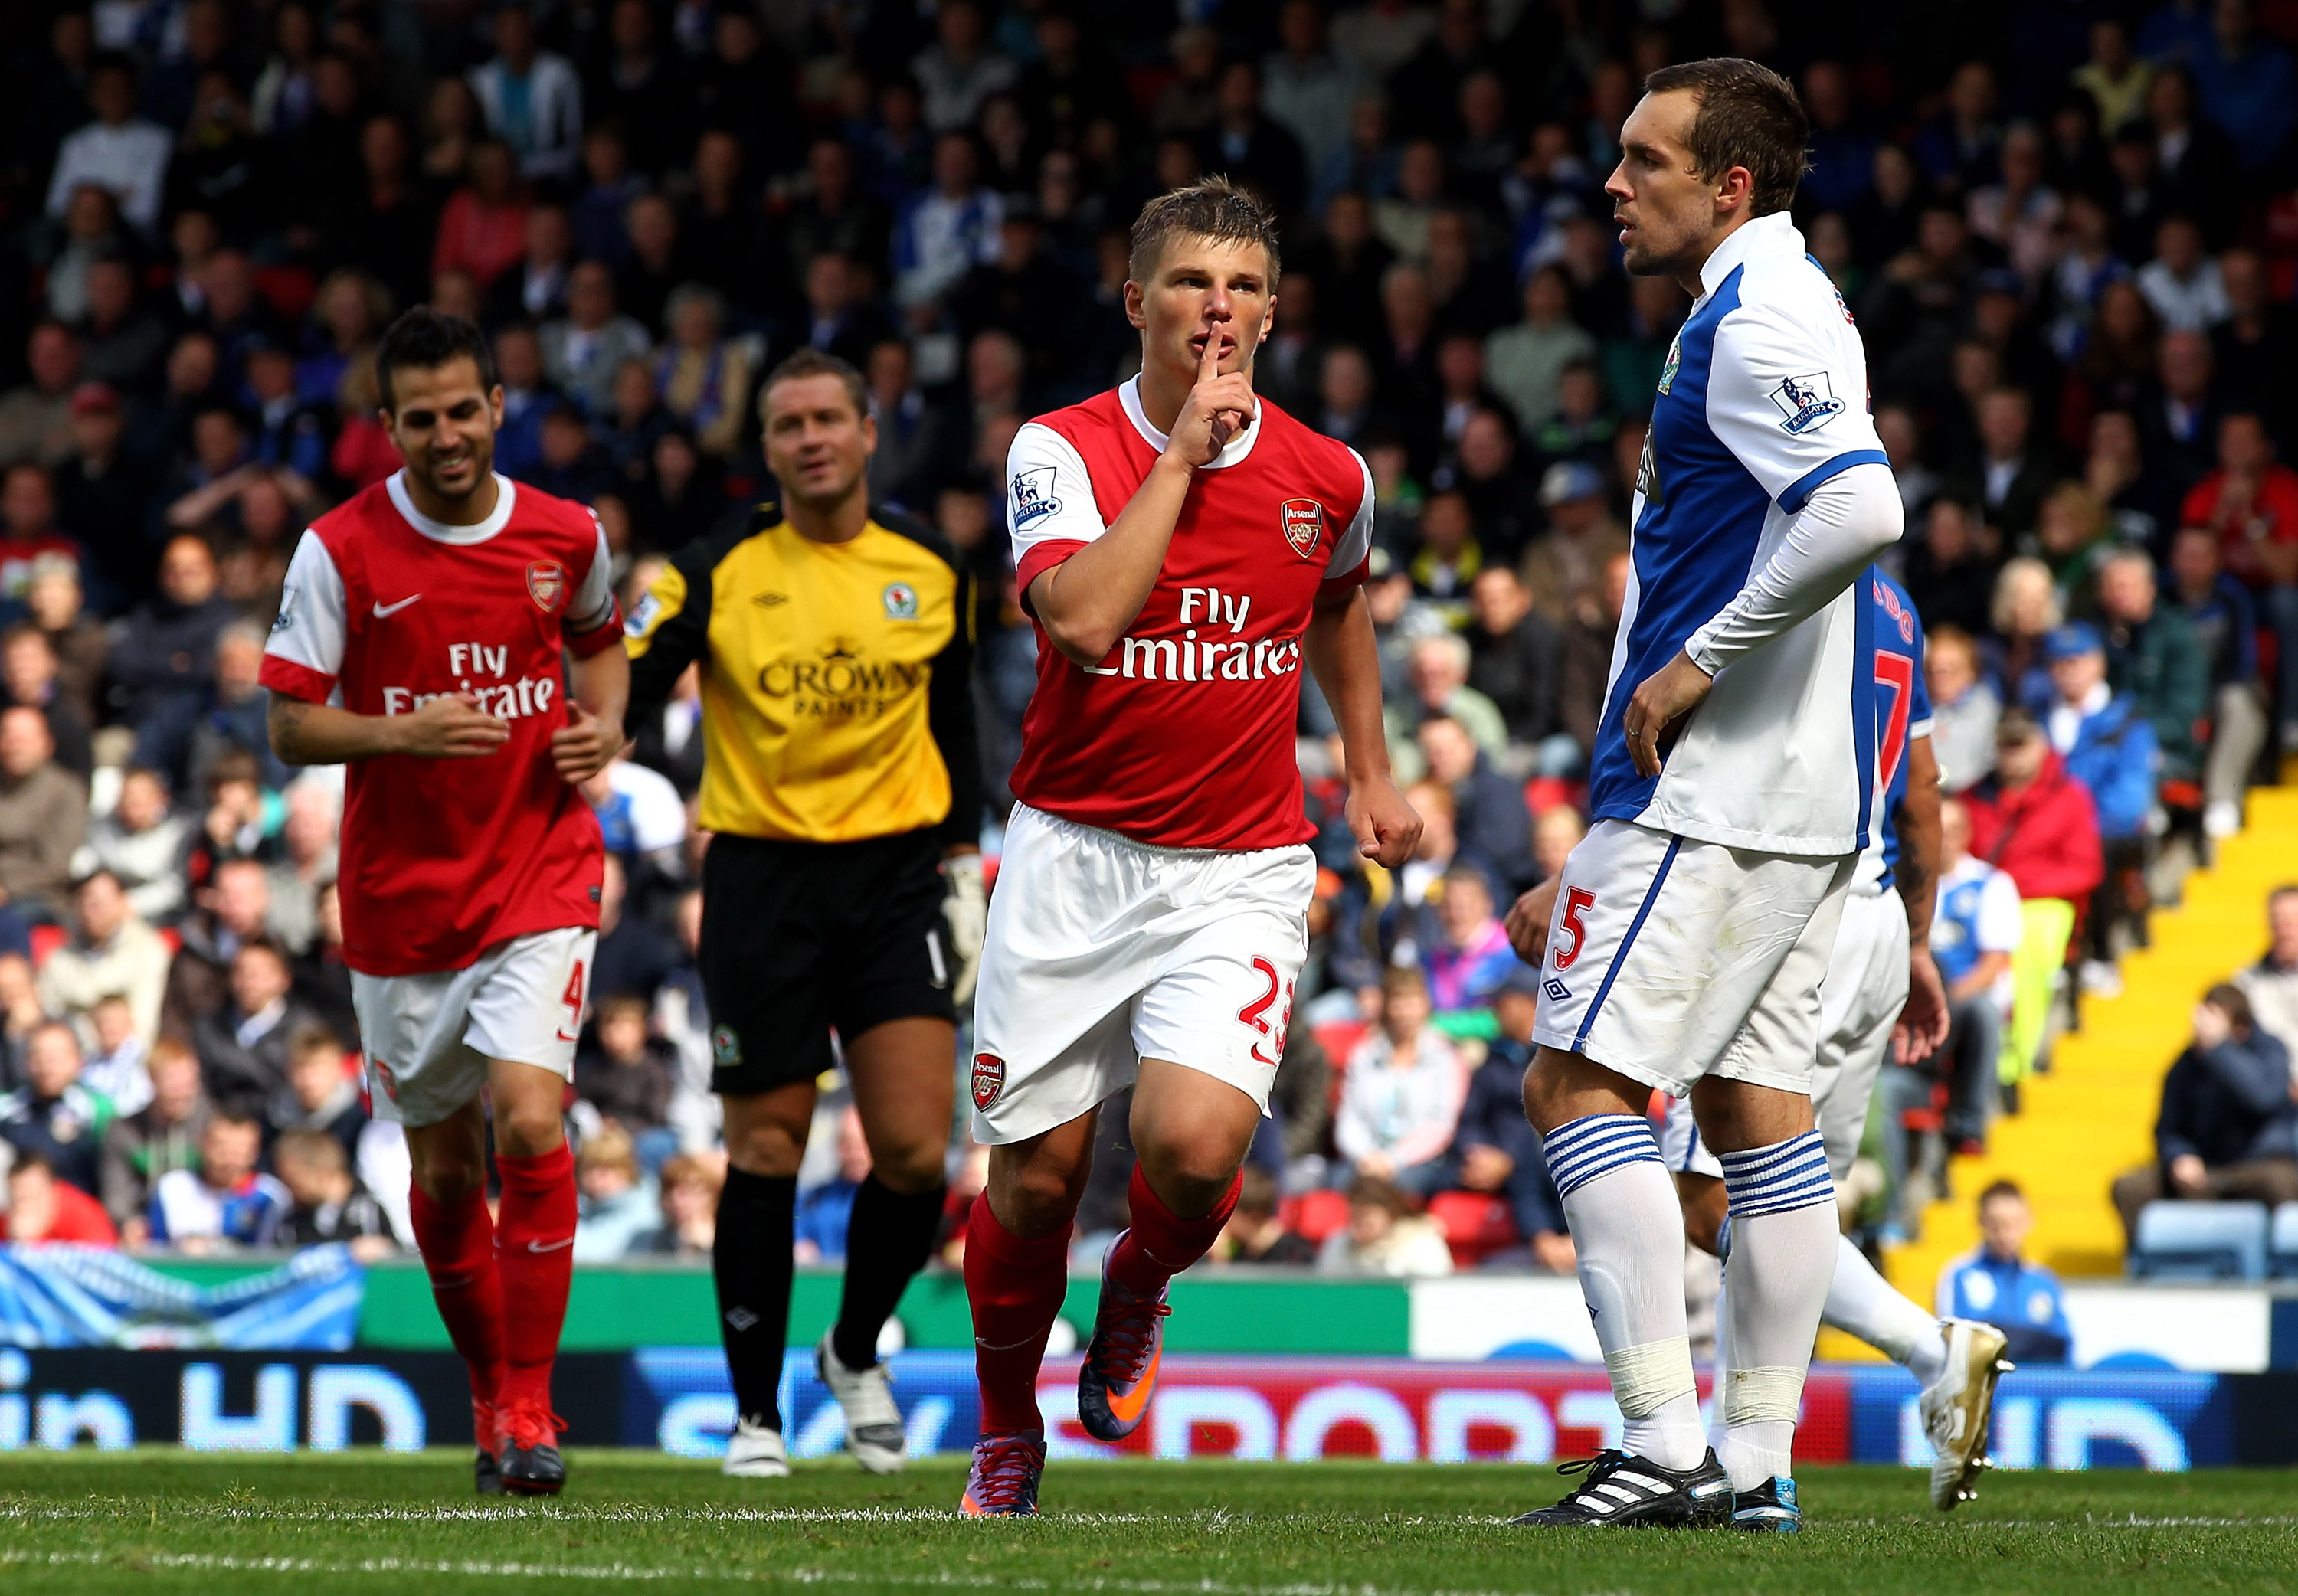 BLACKBURN, ENGLAND - AUGUST 28:  Andrey Arshavin of Arsenal celebrates scoring his team's second goal during the Barclays Premier League match between Blackburn Rovers and Arsenal at Ewood Park on August 28, 2010 in Blackburn, England.  (Photo by Clive Br